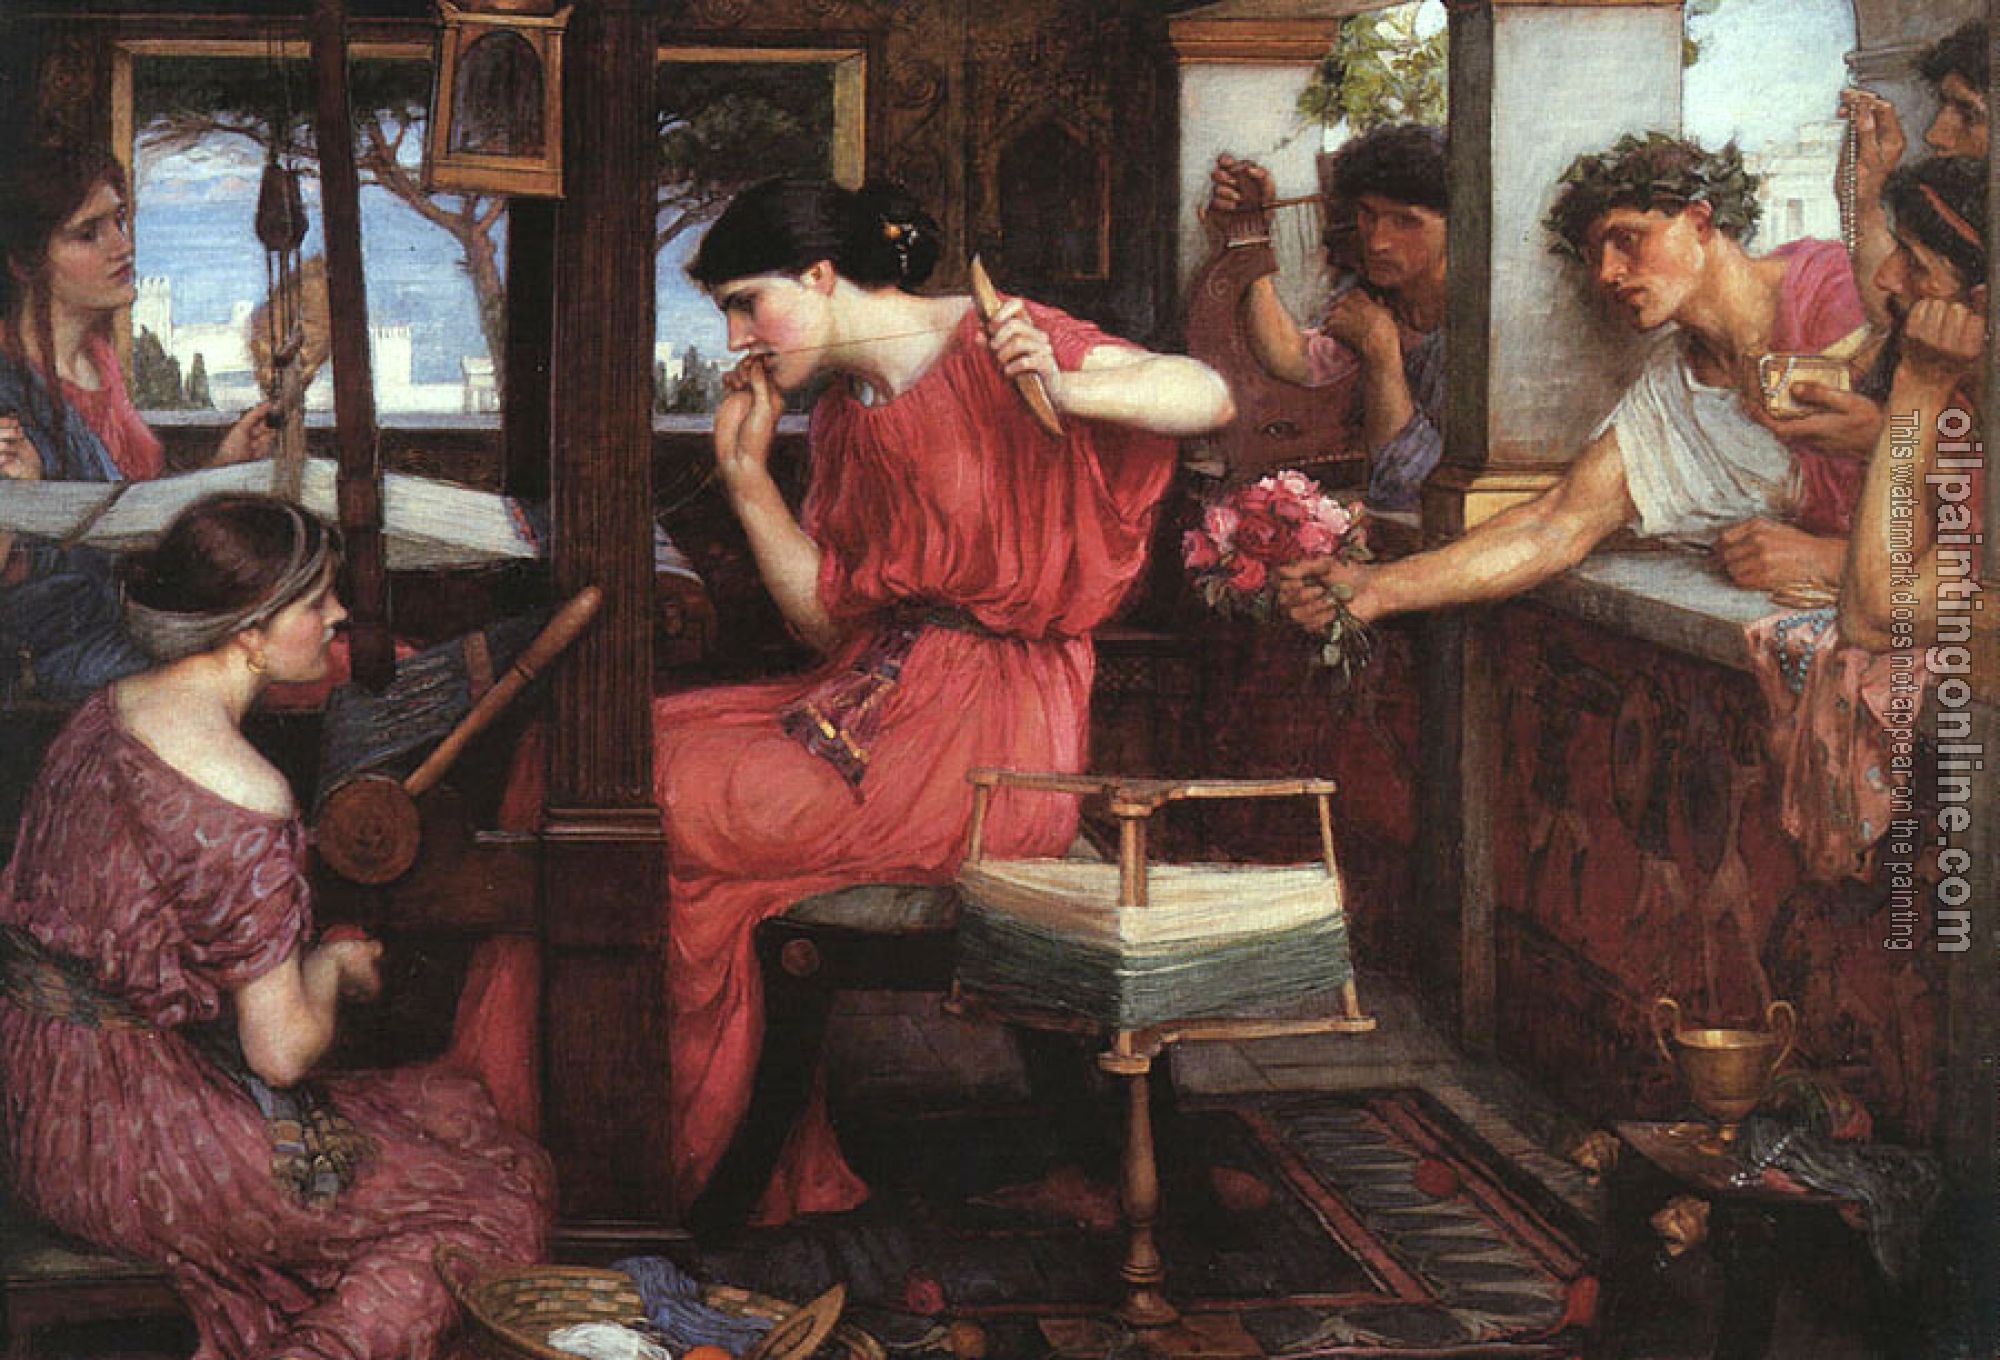 Waterhouse, John William - Penelope and the Suitors